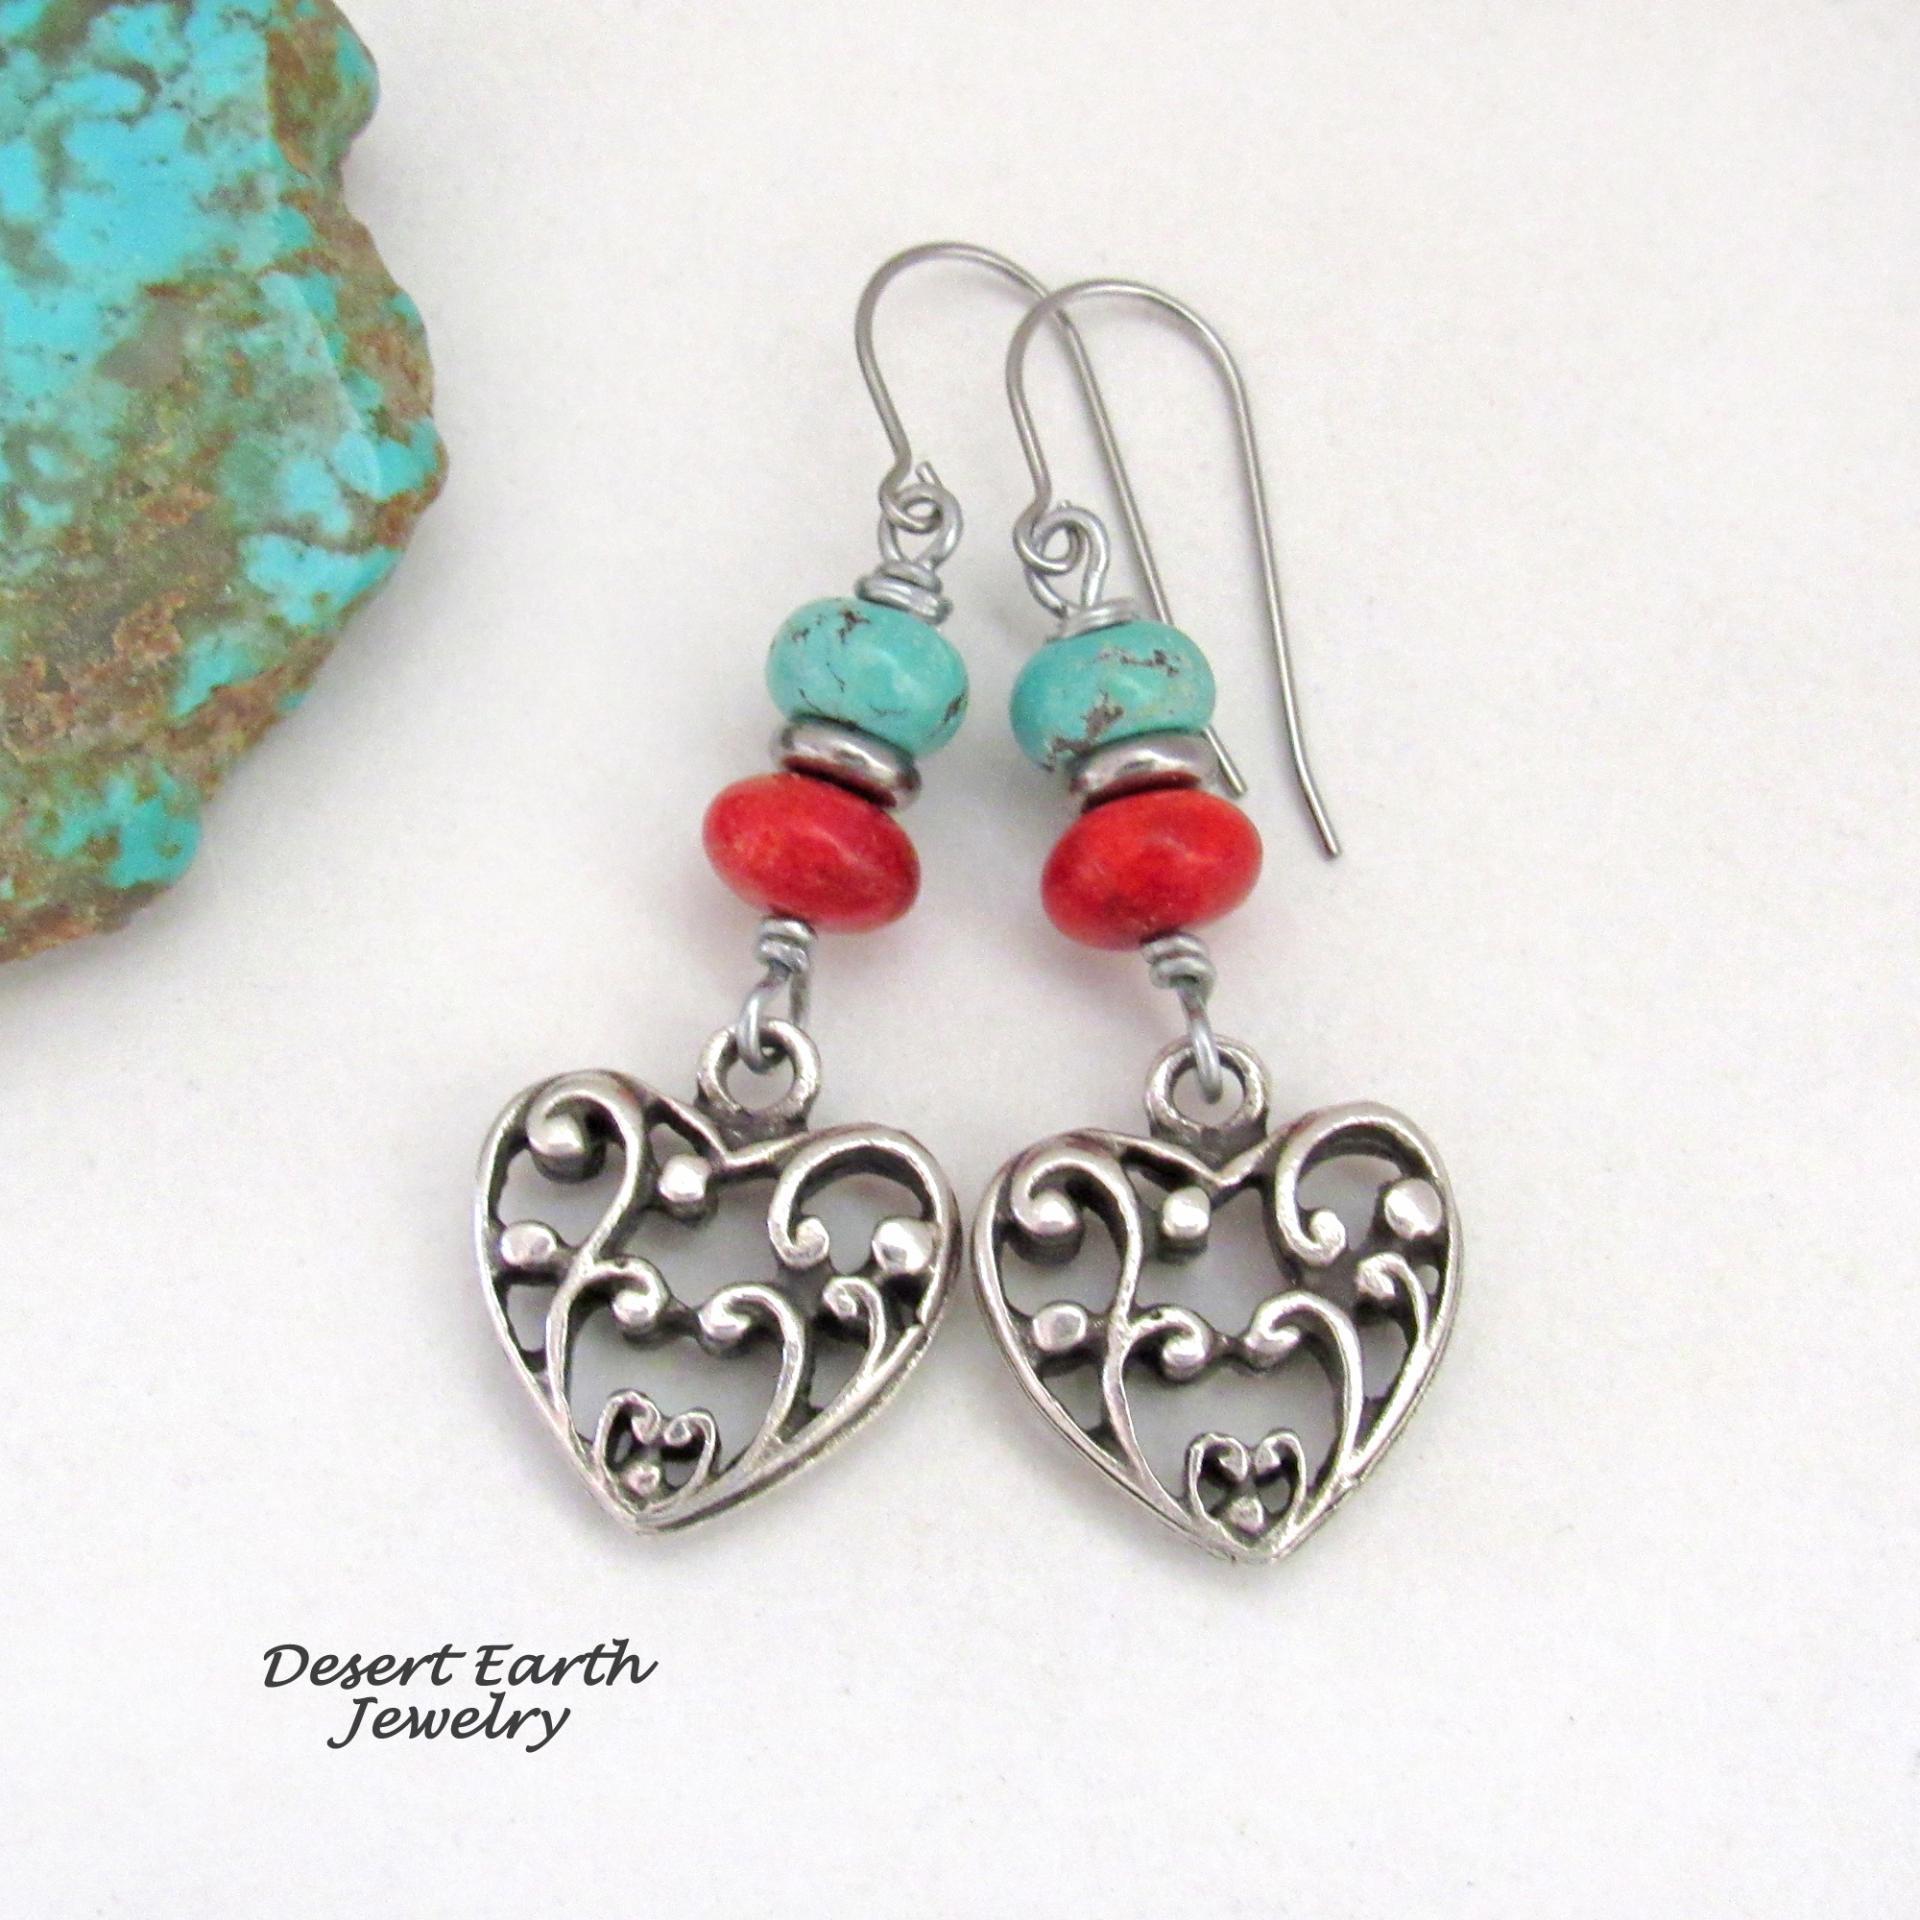 Pewter Heart Filigree Earrings with Turquoise and Red Coral - Sundance Southwest Style Jewelry - Valentine Jewelry Gifts for Women